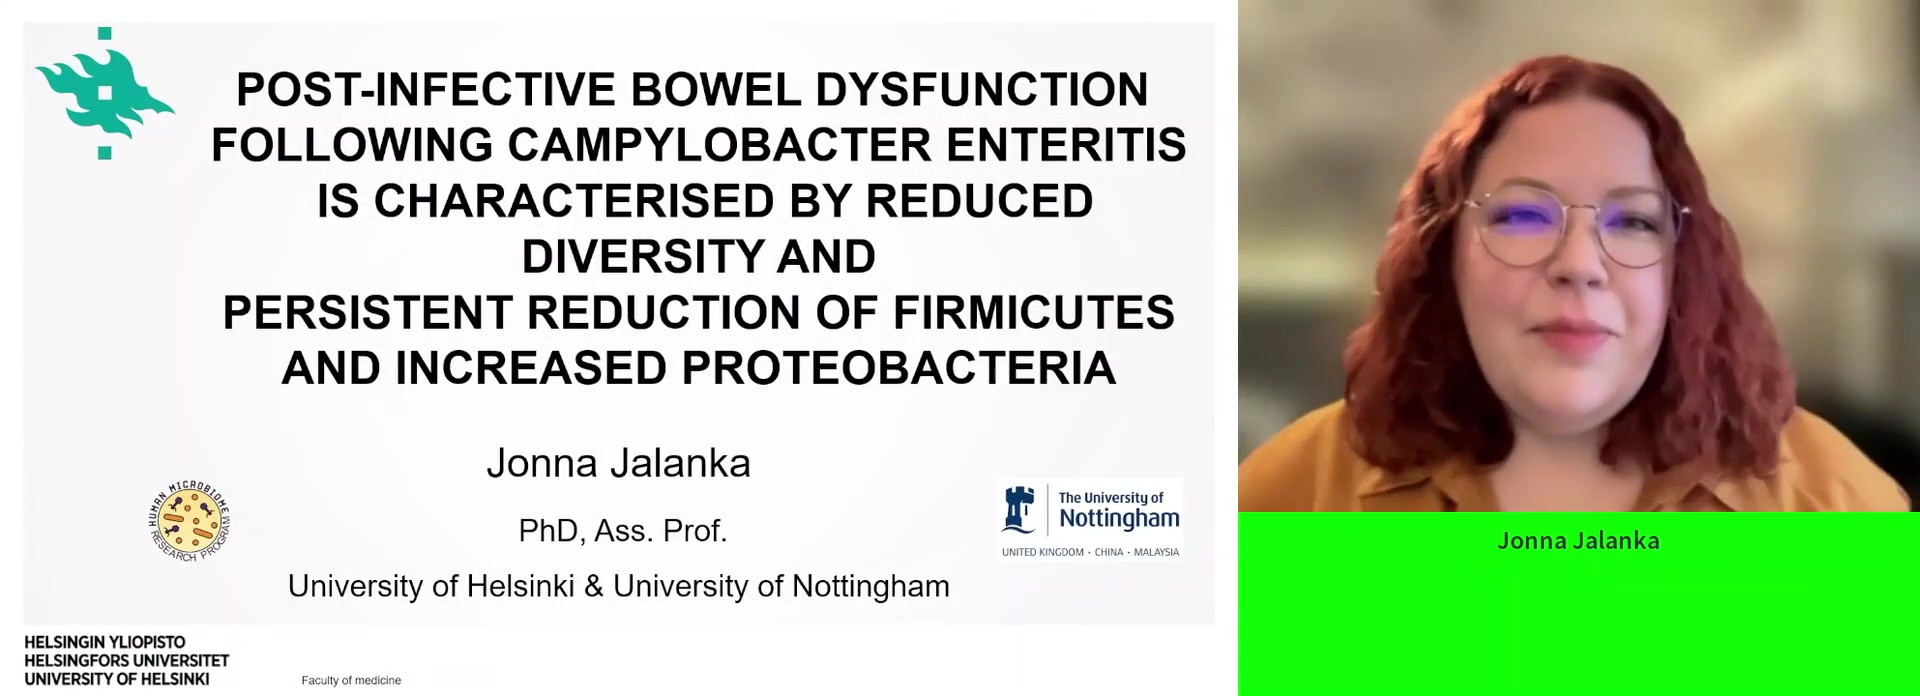 POST-INFECTIVE BOWEL DYSFUNCTION FOLLOWING CAMPYLOBACTER ENTERITIS IS CHARACTERISED BY REDUCED MICROBIAL DIVERSITY AND PERSISTENT REDUCTION OF FIRMICUTES AND INCREASE OF PROTEOBACTERIA